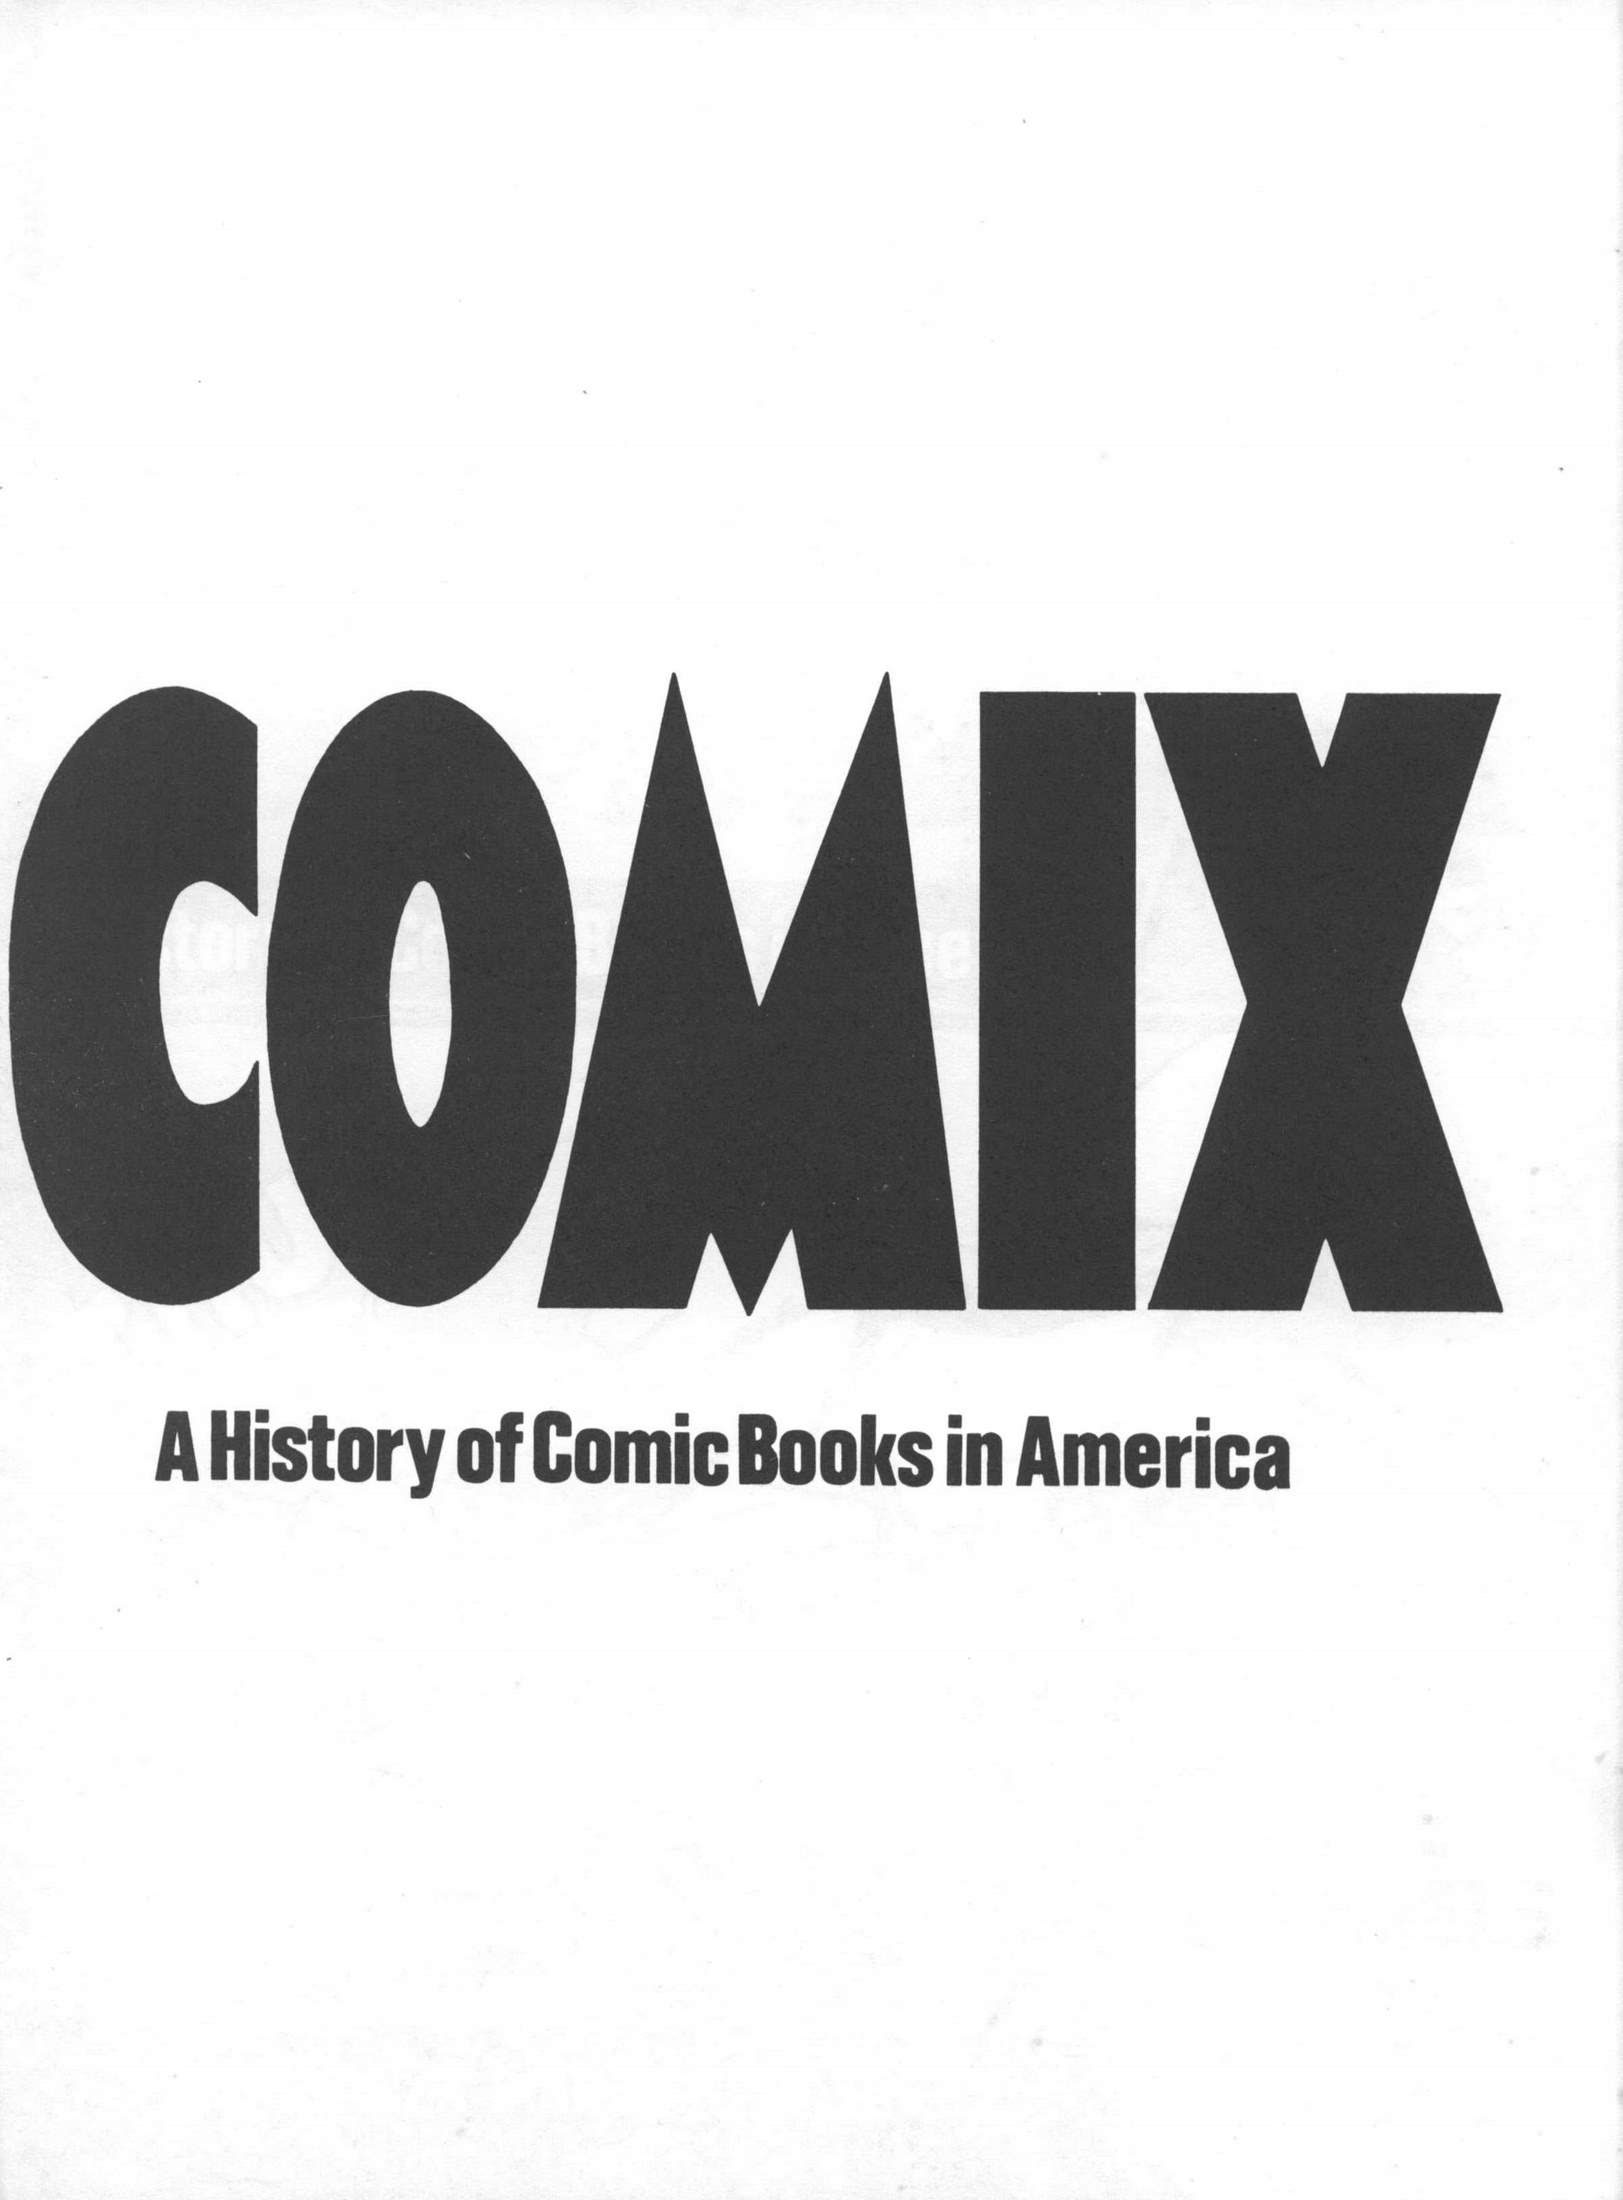 Read online Comix: A History of Comic Books in America comic -  Issue # TPB (Part 1) - 7